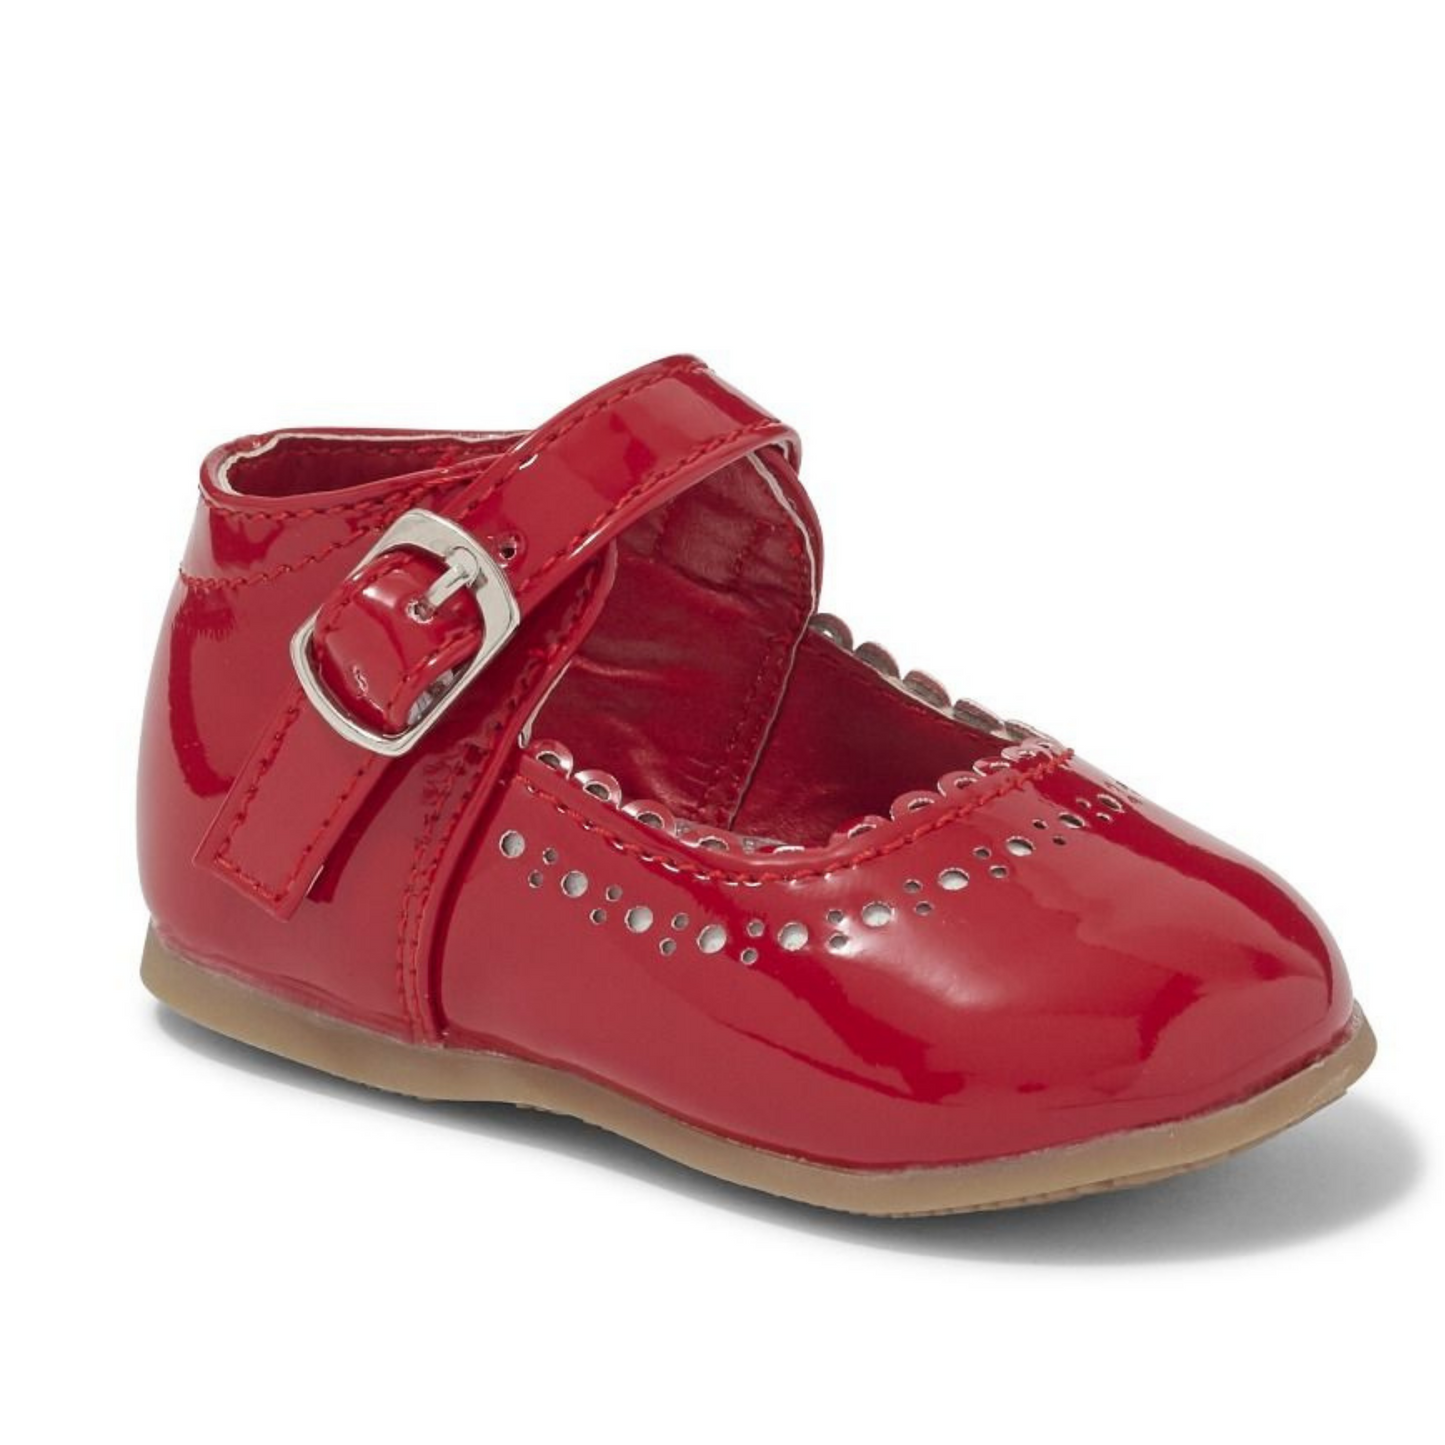 Debbie Red Shoe With Buckle Fastening